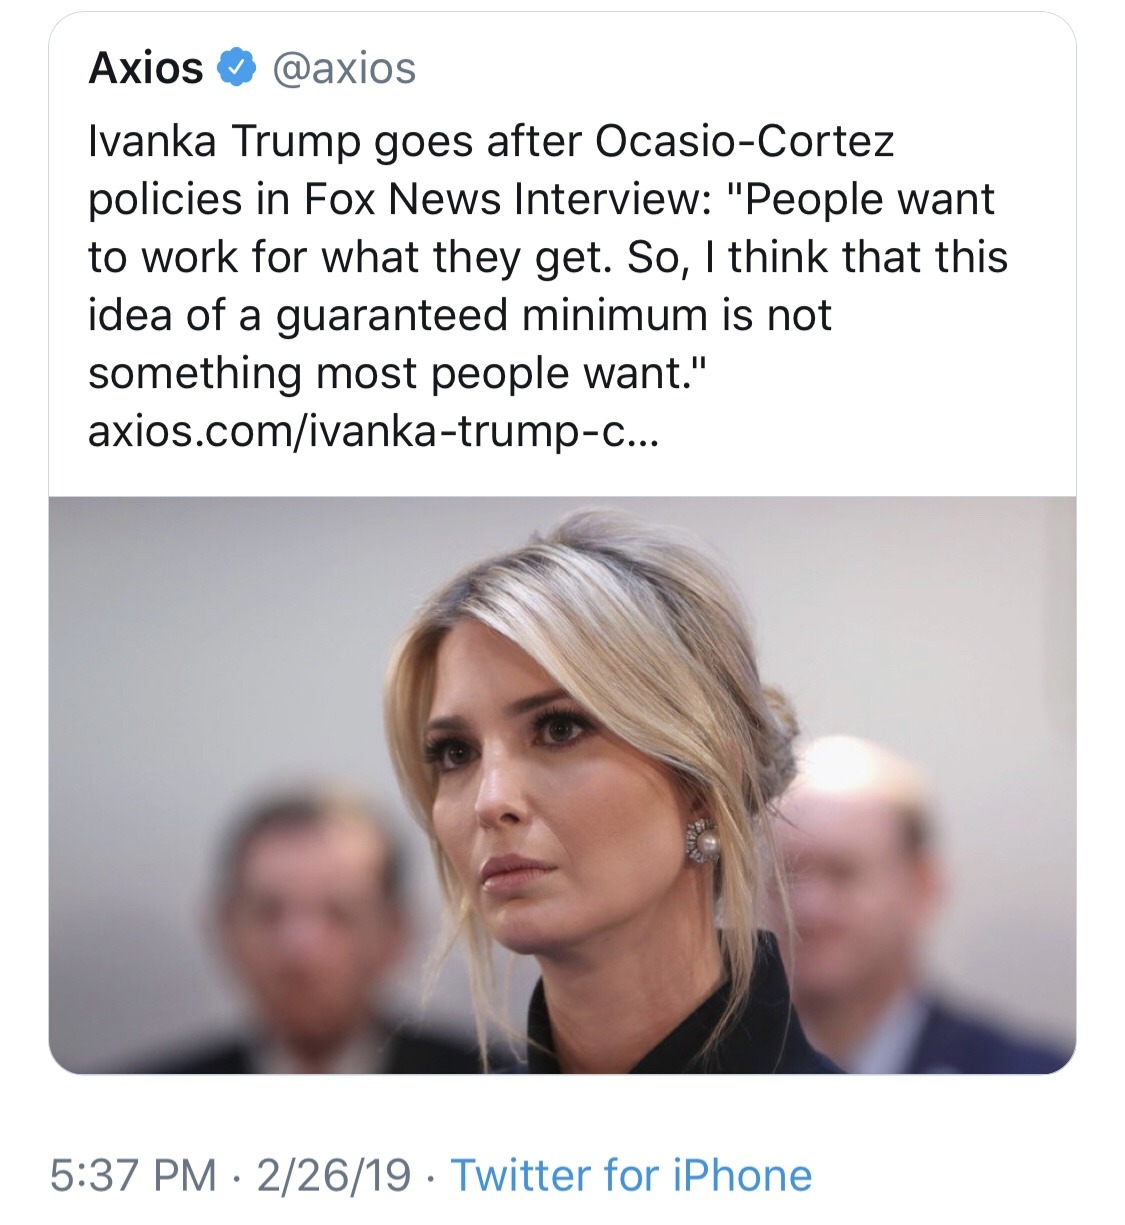 odinsblog: Ivanka Trump, a trust fund baby who has never done an honest day’s work,